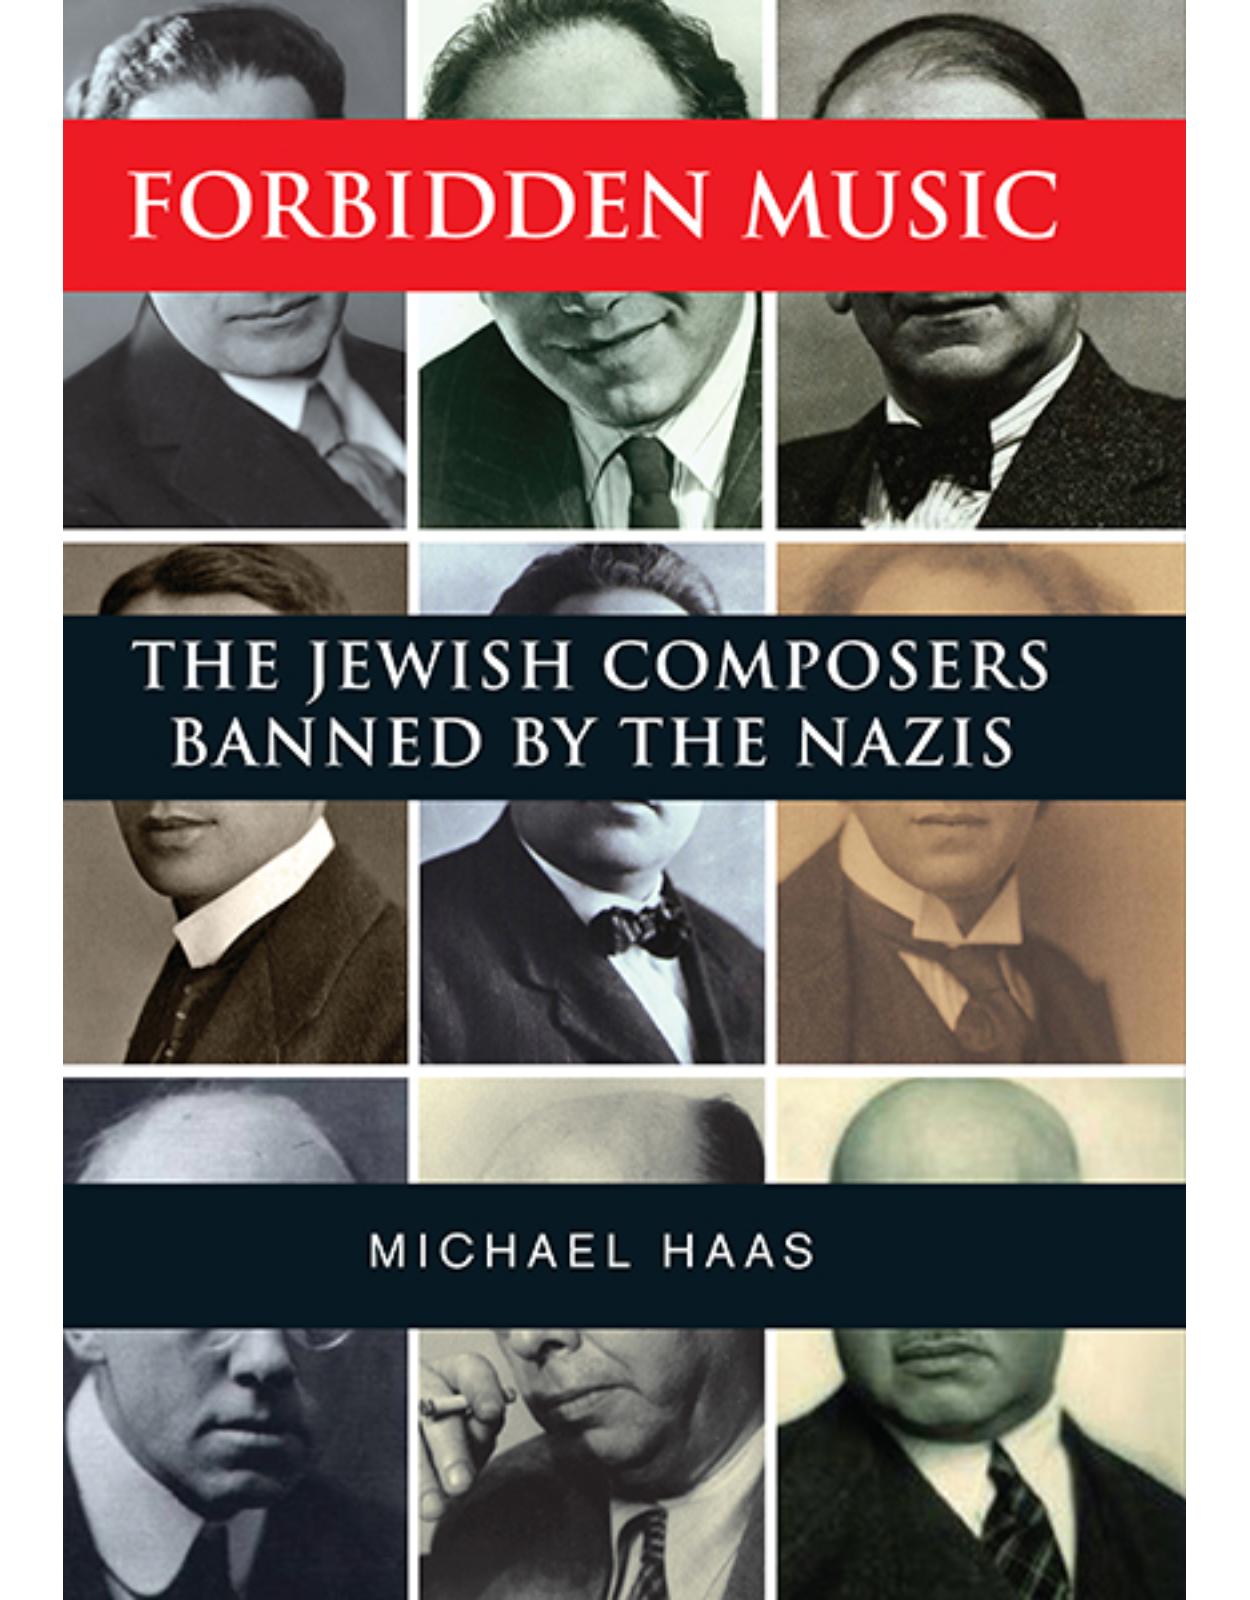 Forbidden Music. The Jewish Composers Banned by the Nazis